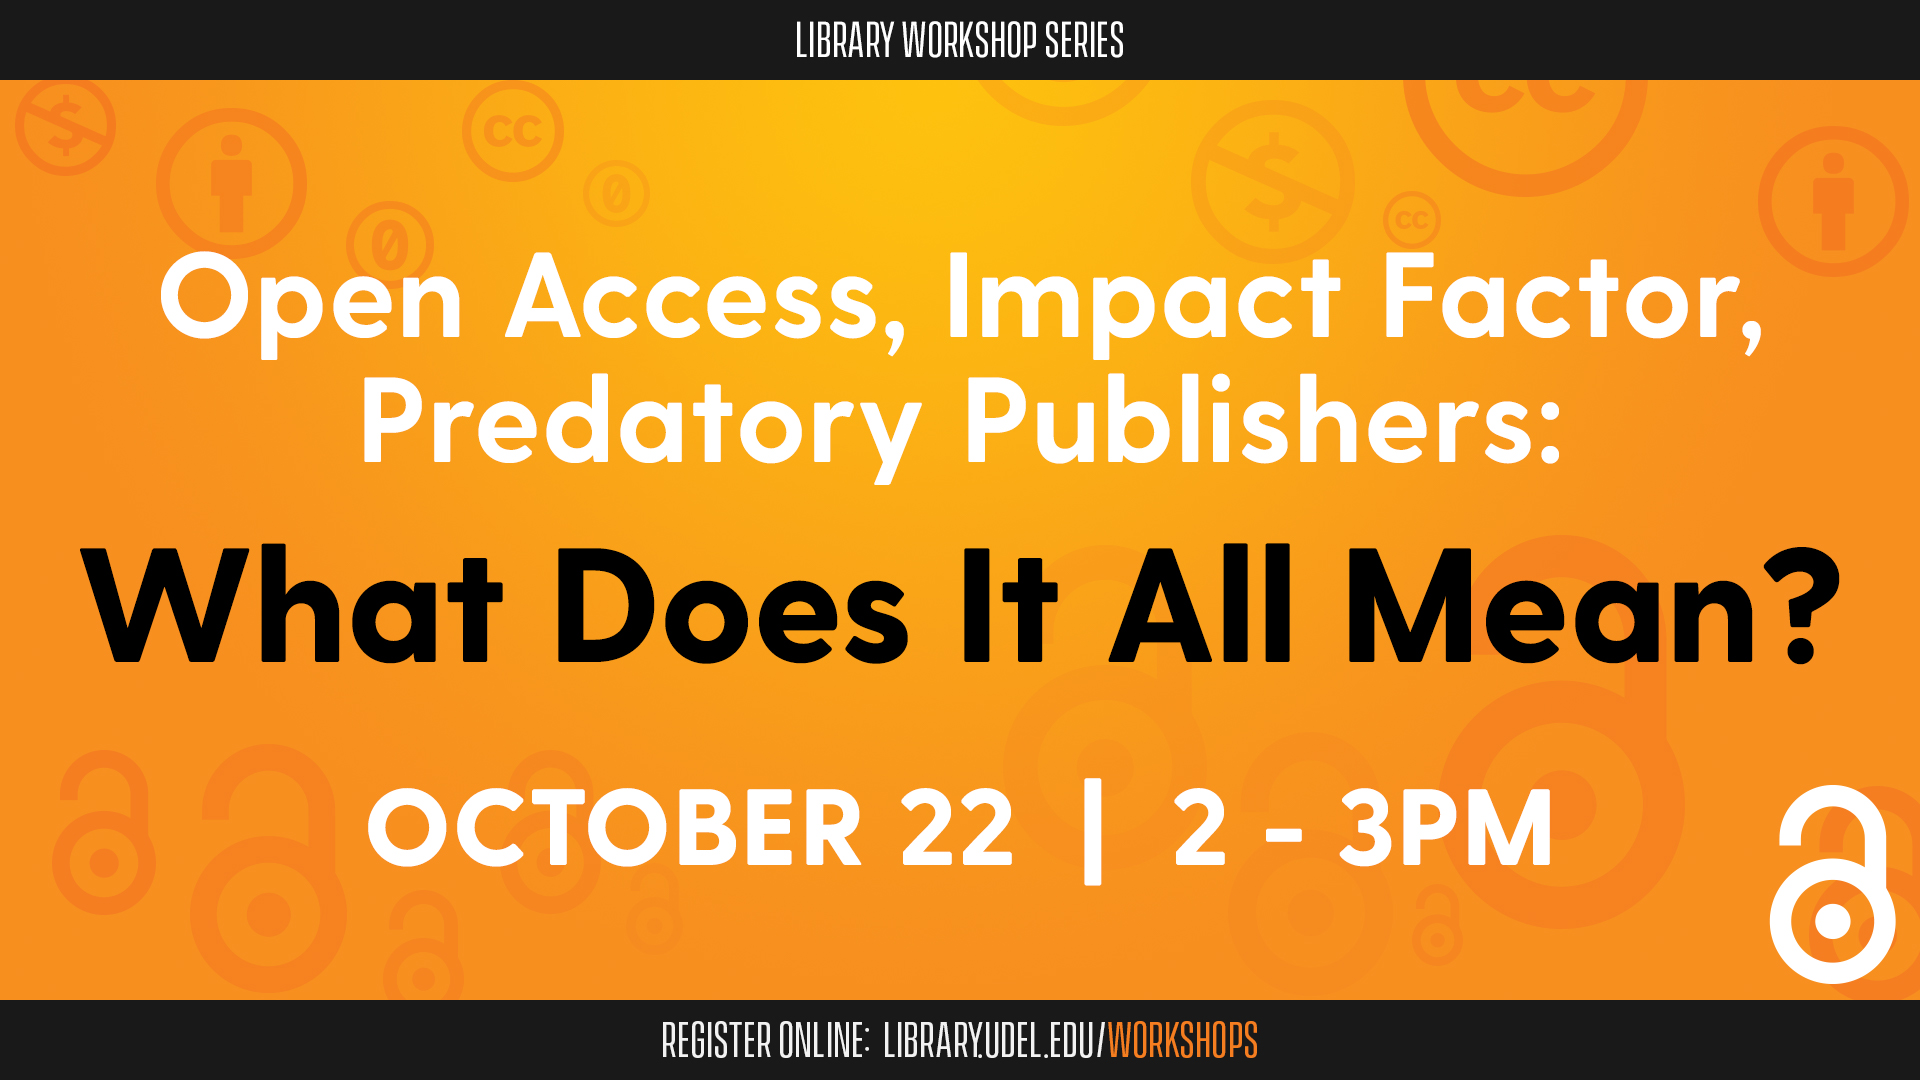 Open Access, Impact Factor, Predatory Publishers: What Does It All Mean?